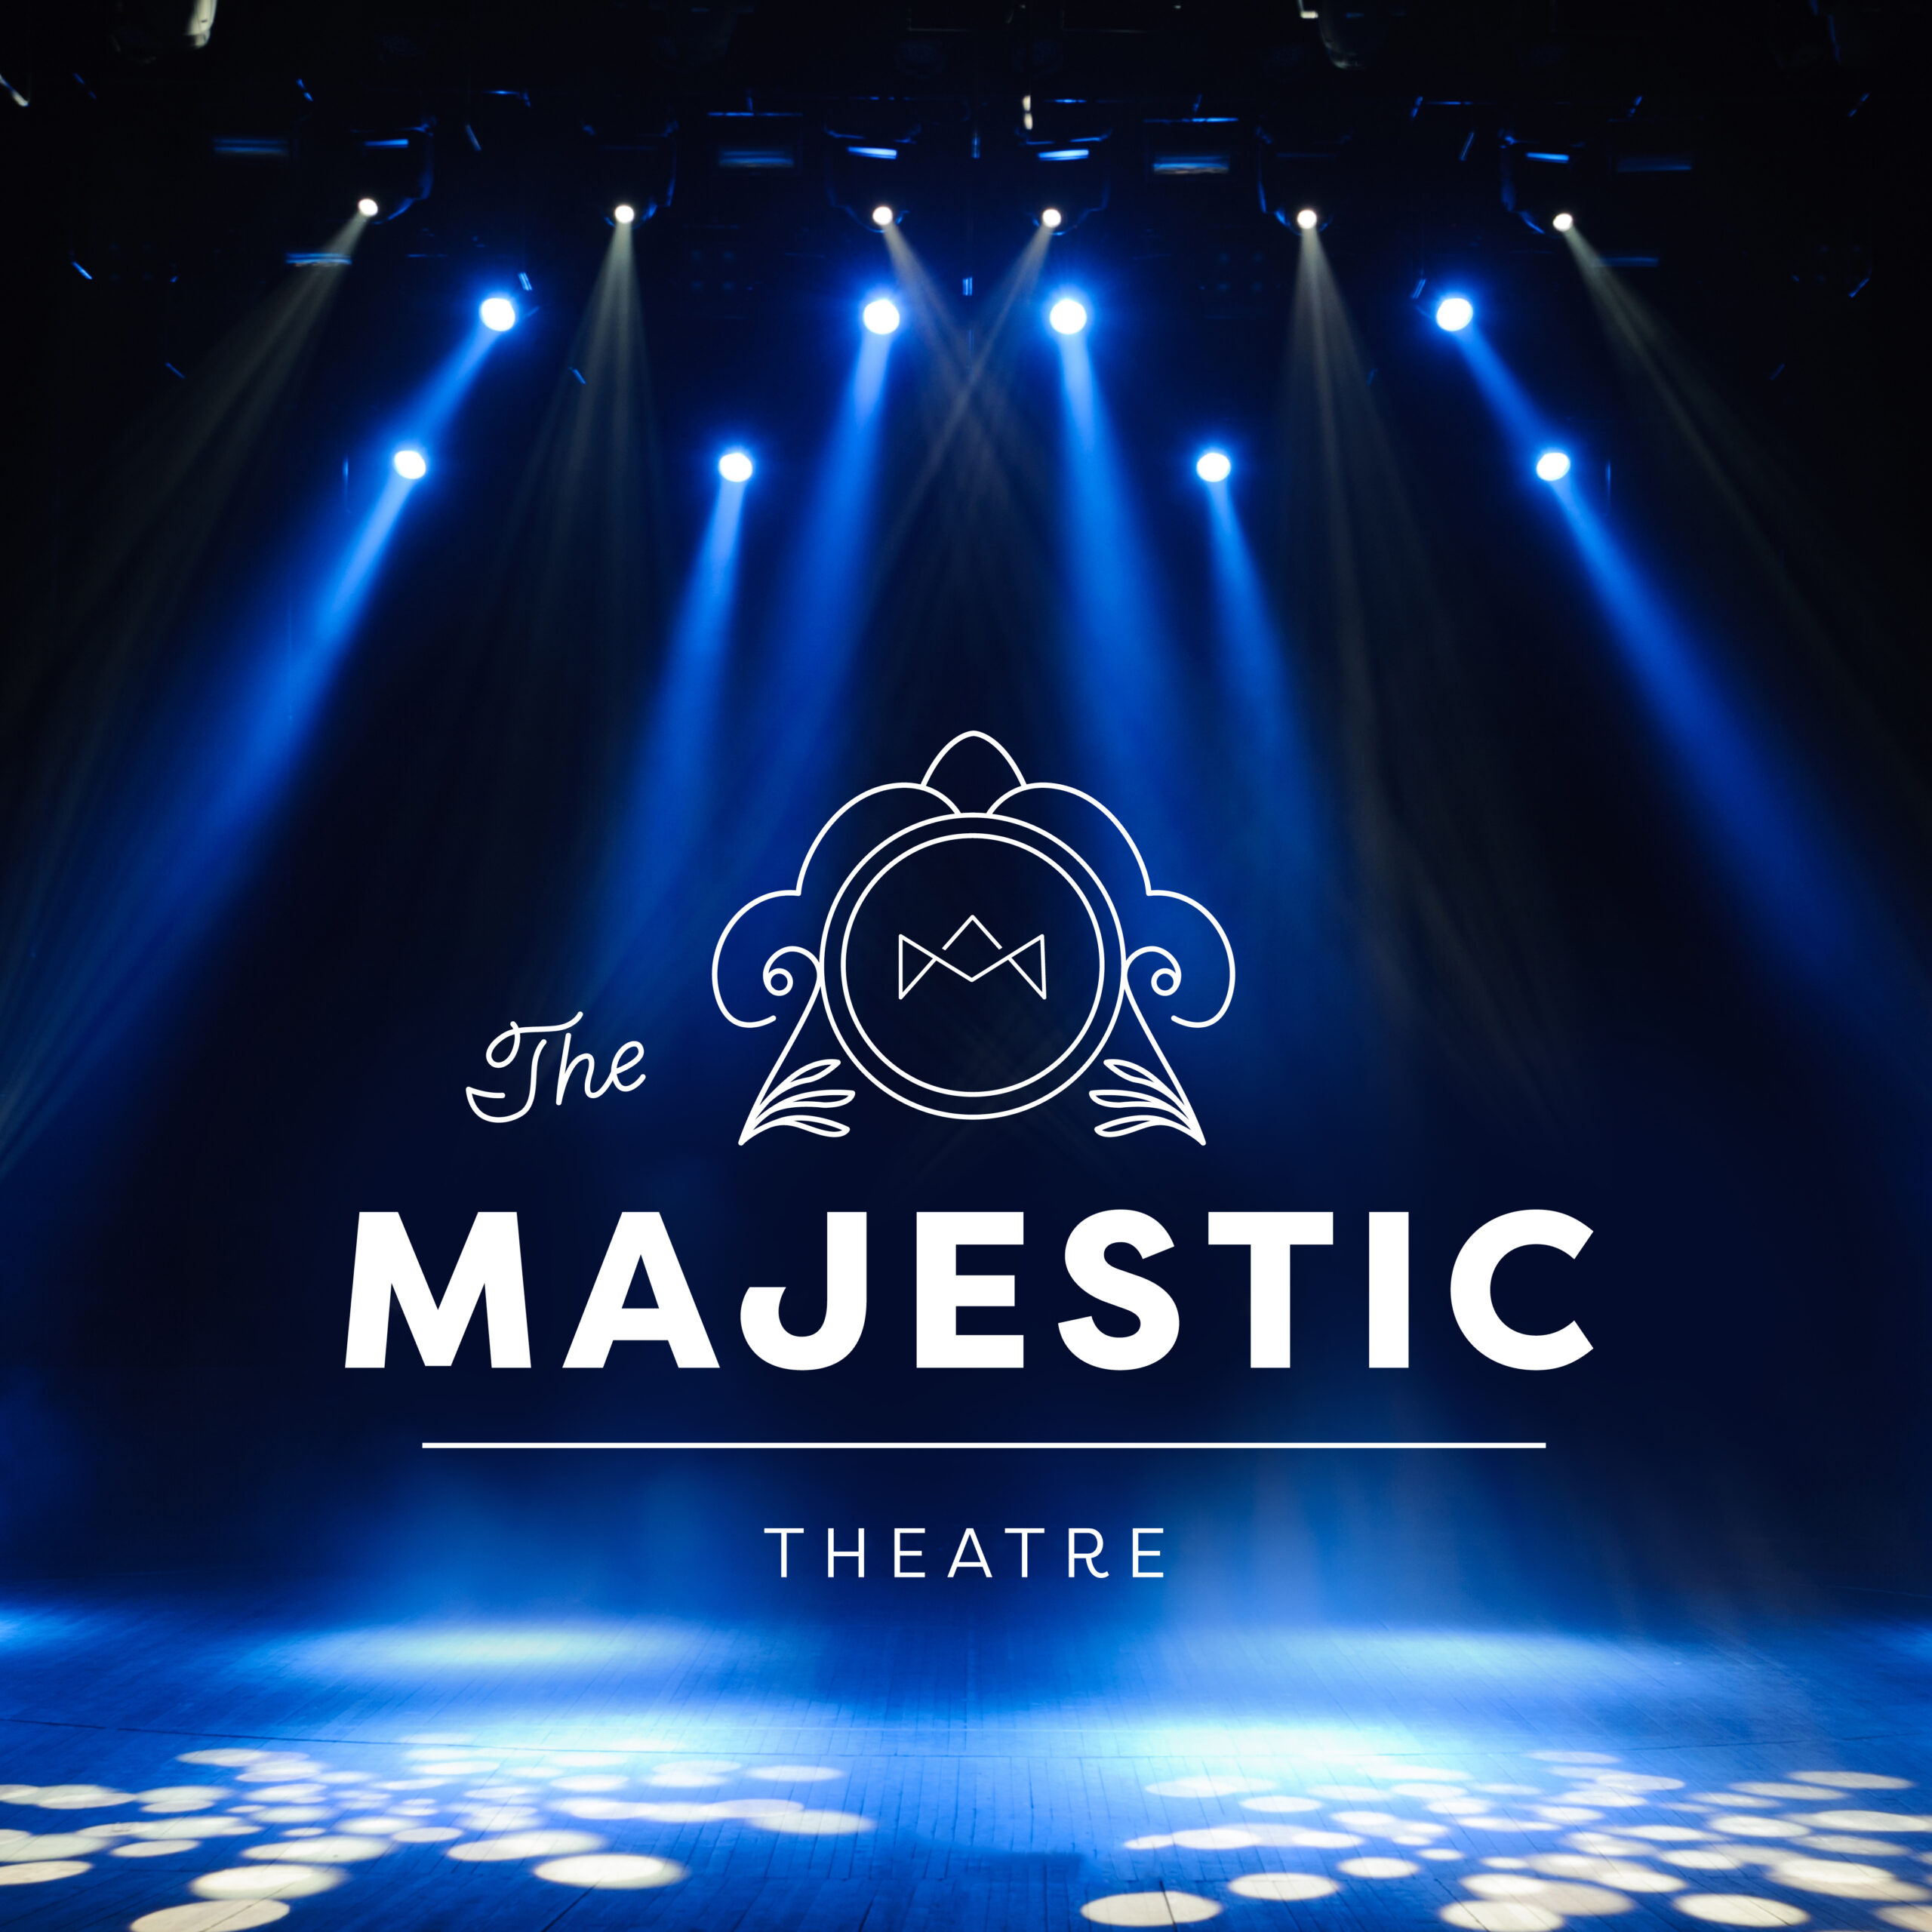 The Majestic Theatre St. John's Logo against the backdrop of the stage.